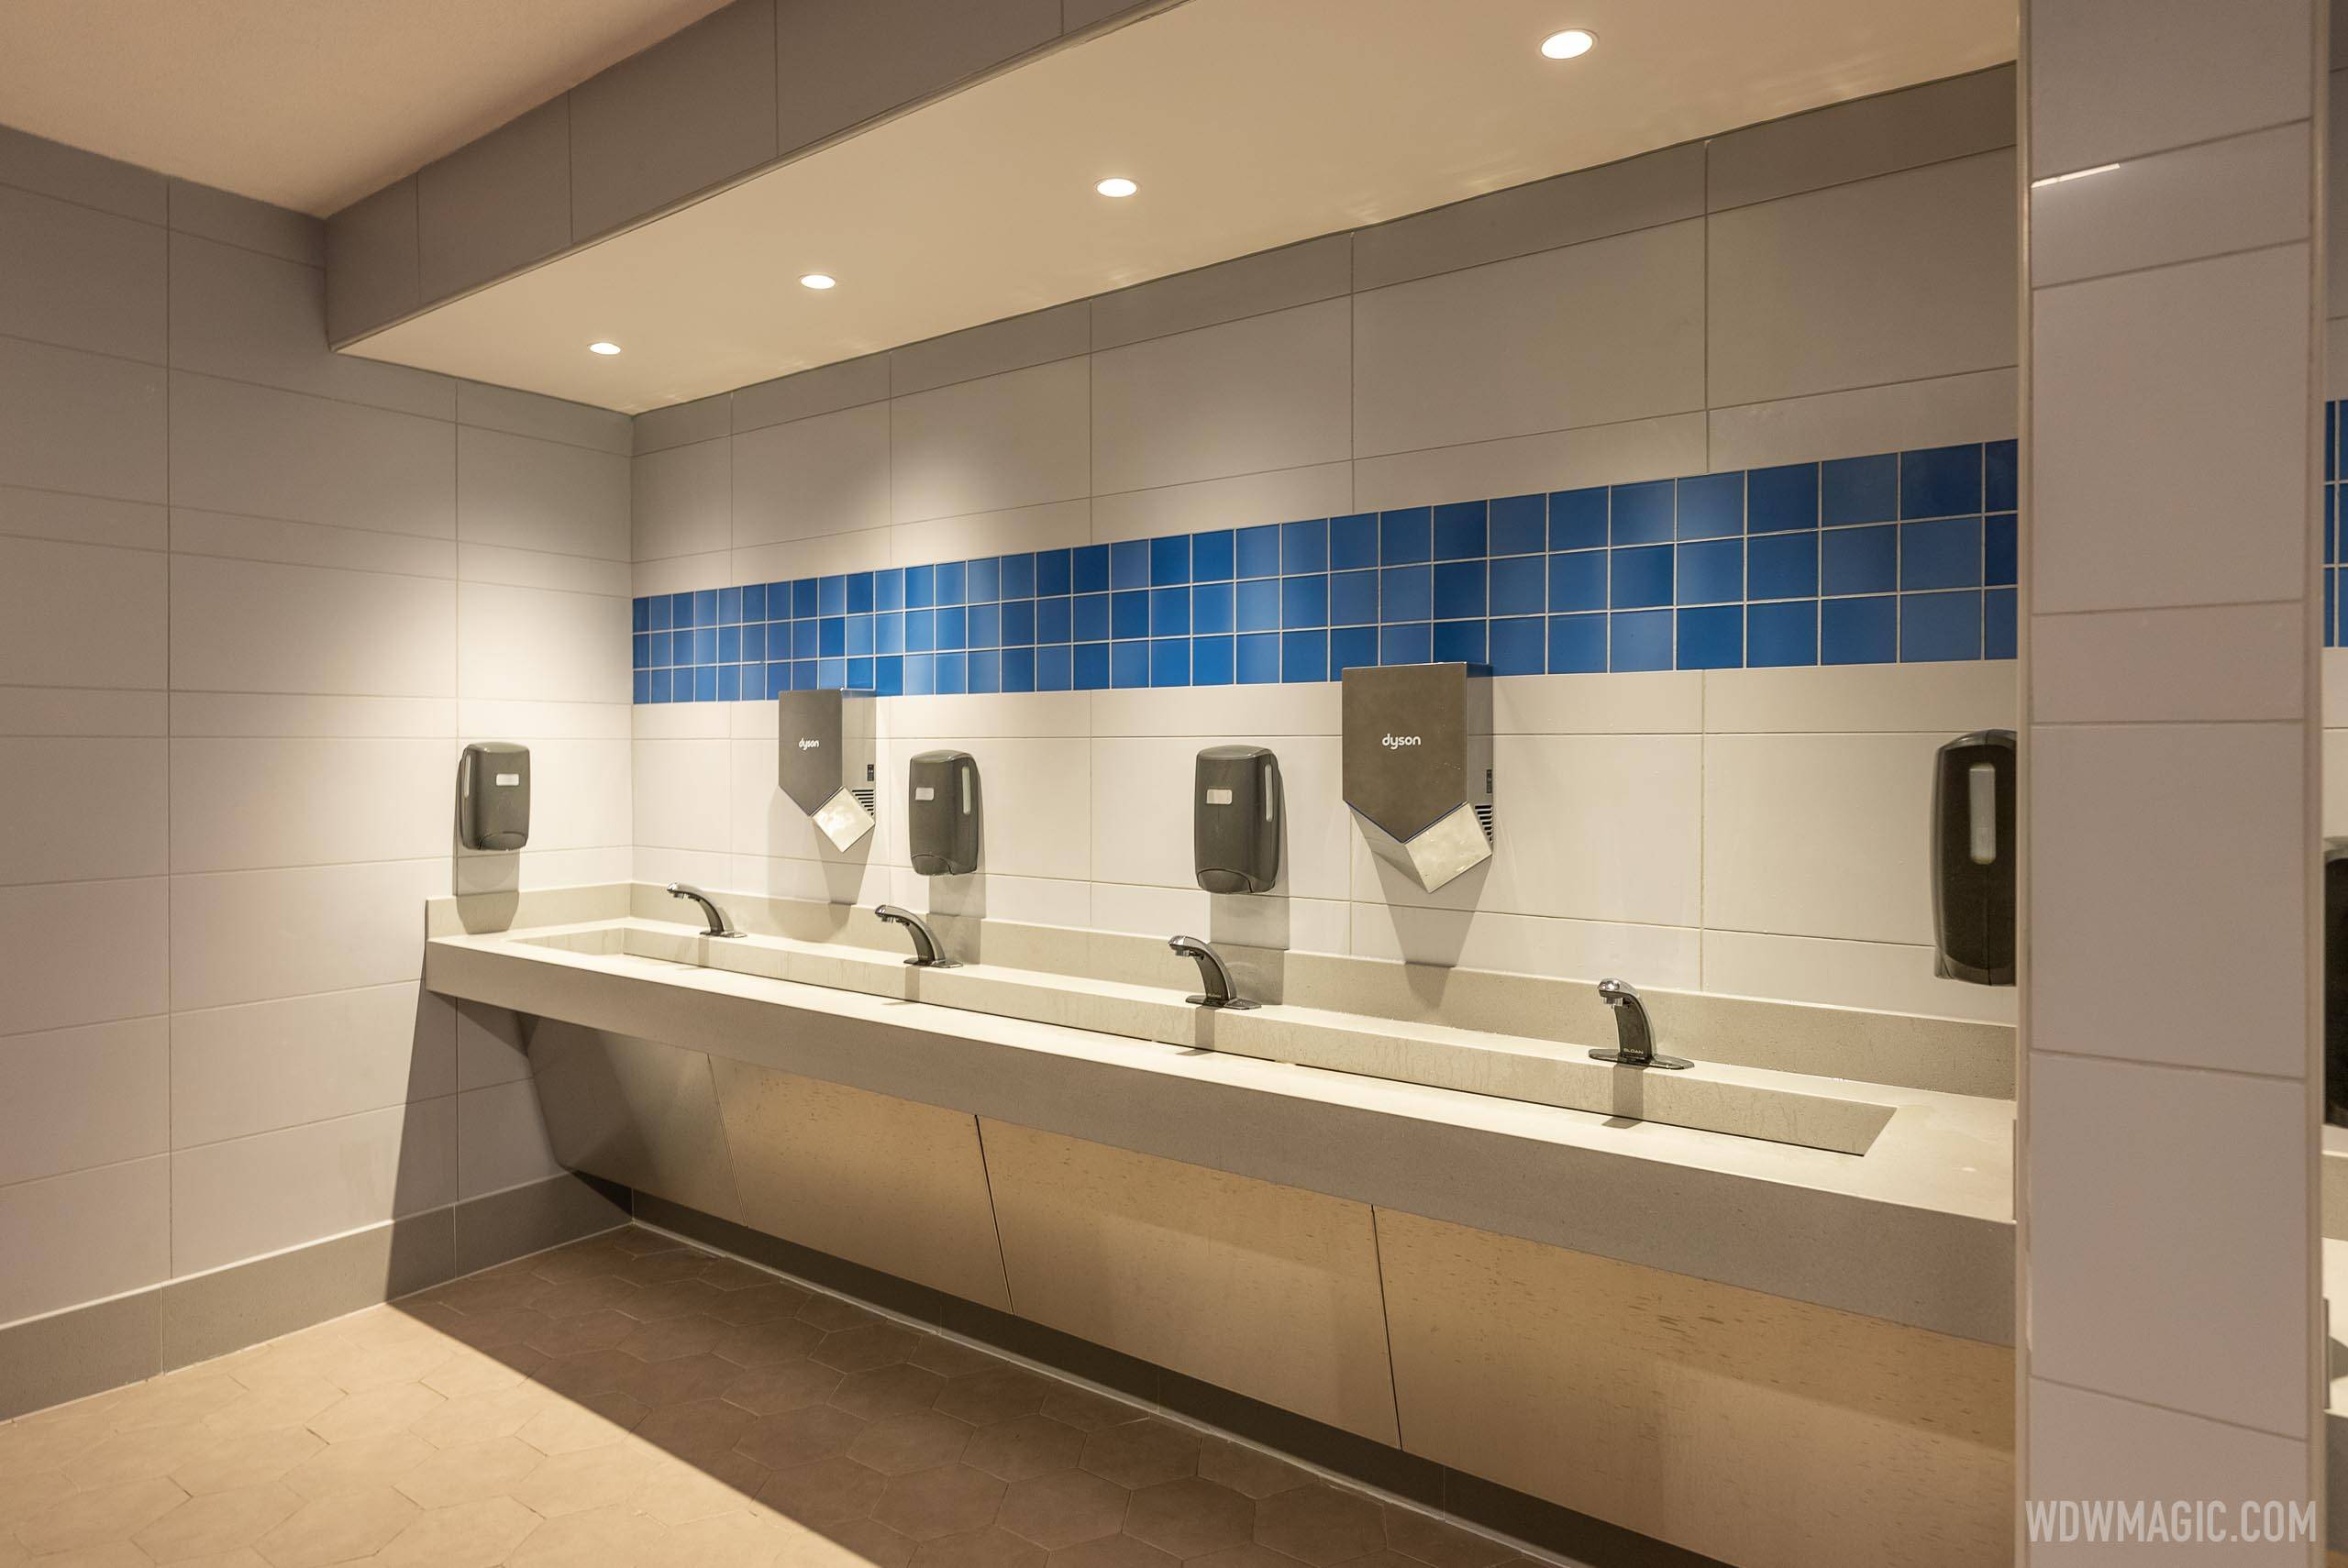 EPCOT Future World East restroom reopening - November 26 2020